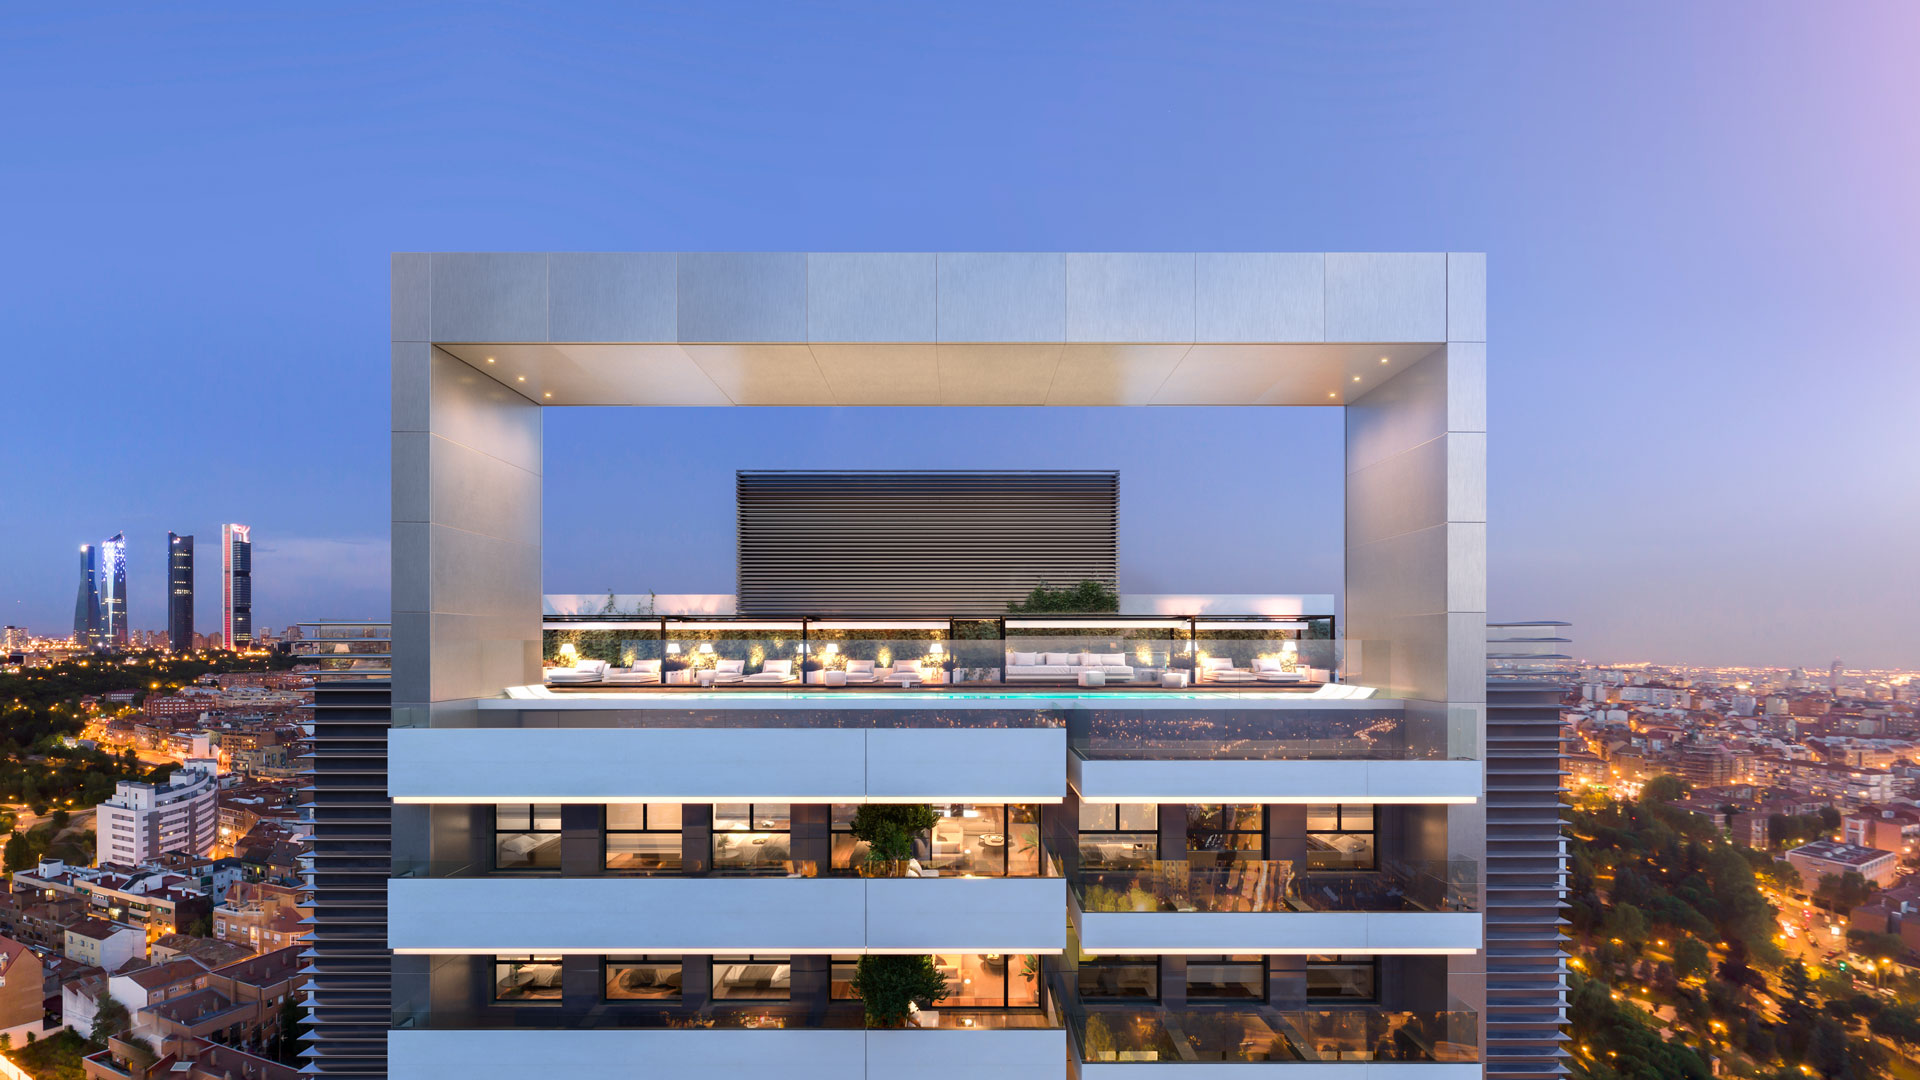 Frontal view of the panoramic rooftop swimming pool with the four towers in the background